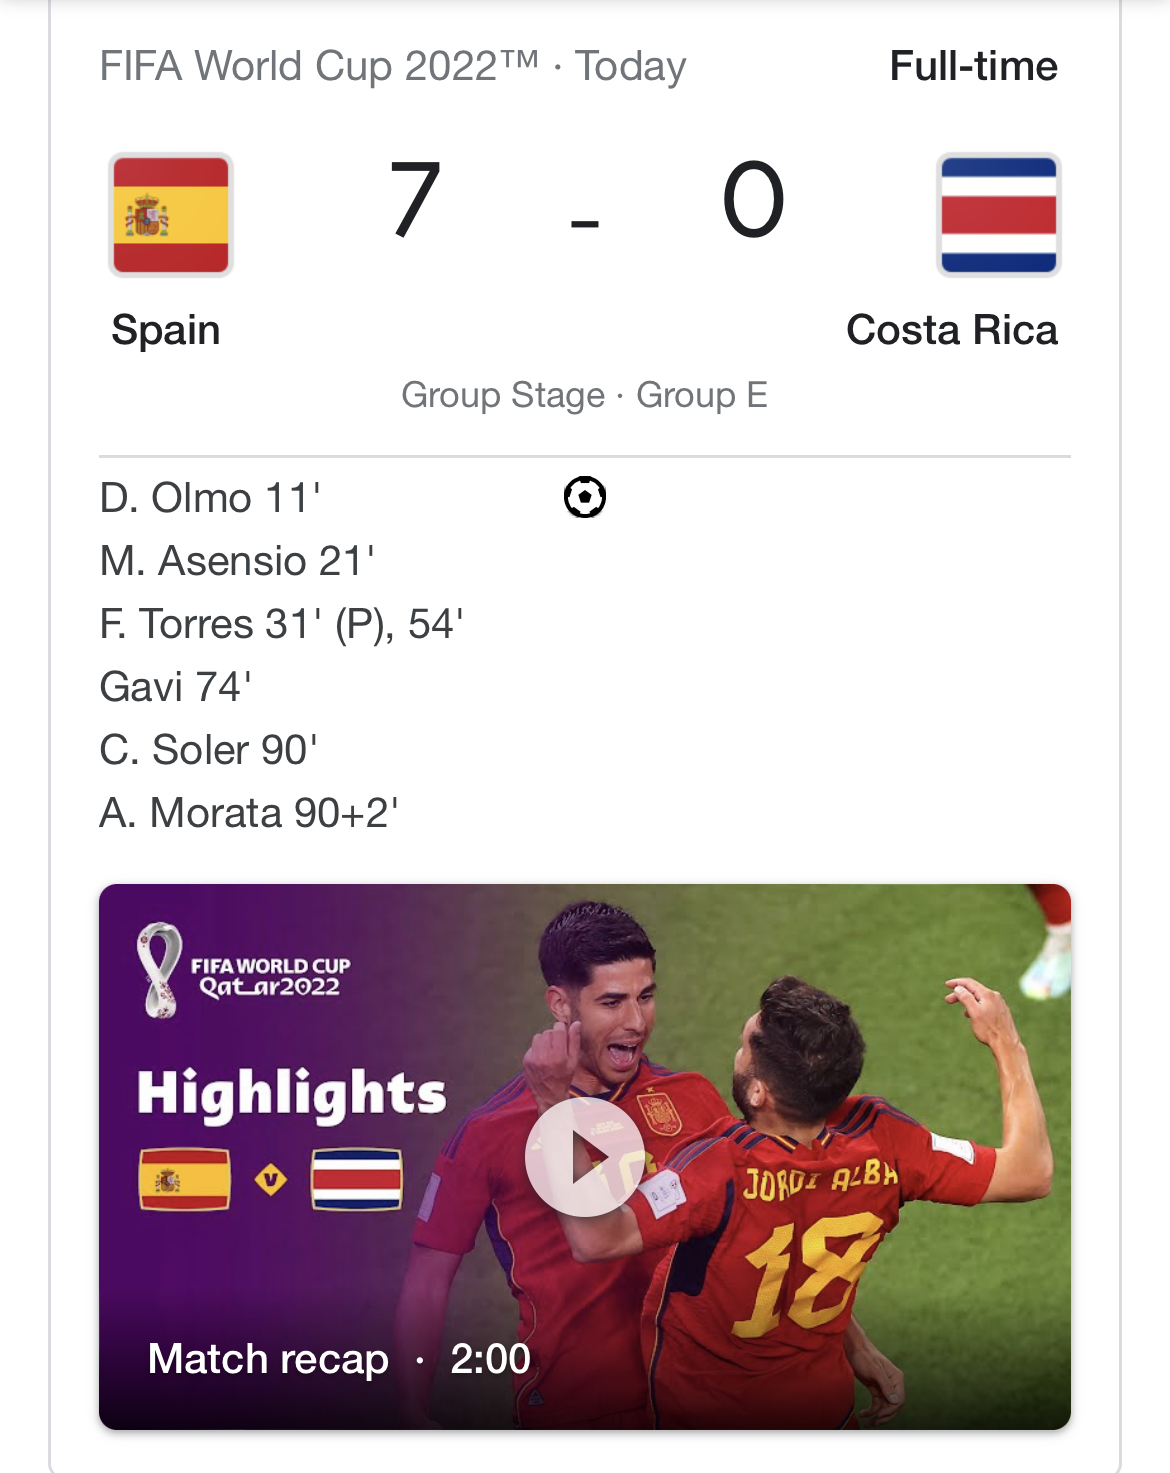 FIFA World Cup 2022™ - Today Full-time

(I [a
==
Spain Costa Rica

Group Stage - Group E

D. Olmo 11" ®
M. Asensio 21°

F. Torres 31' (P), 54'

Gavi 74'

C. Soler 90!

A. Morata 90+2'

FIFA WORLD CUP
Qat_ar2022

_—e
=p Fo a
yy

Match recap - 2:00